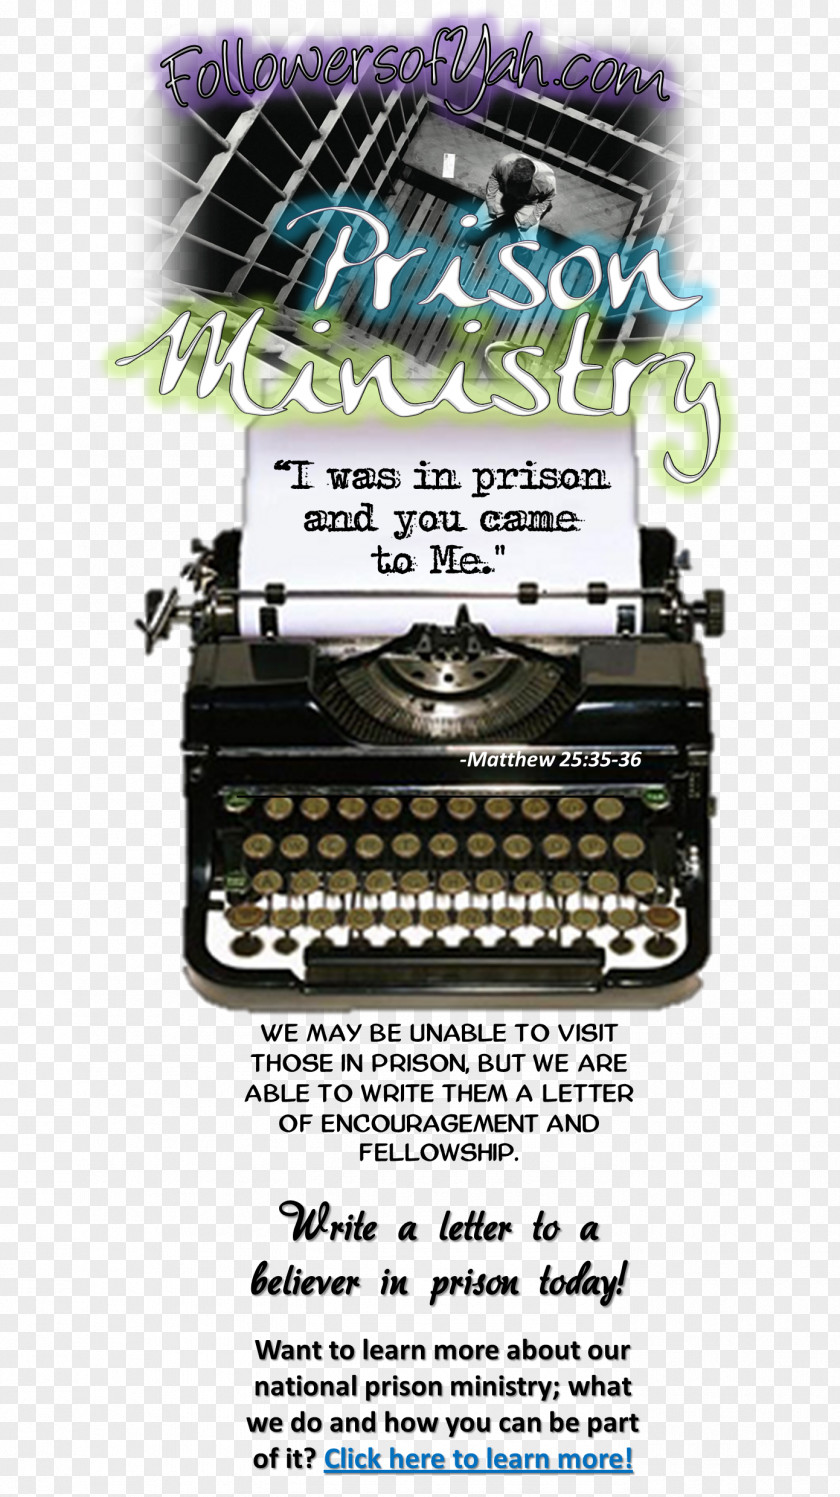 Prison Ministry Publishing Need A Job? Publish Book! With Openoffice Author Writer PNG